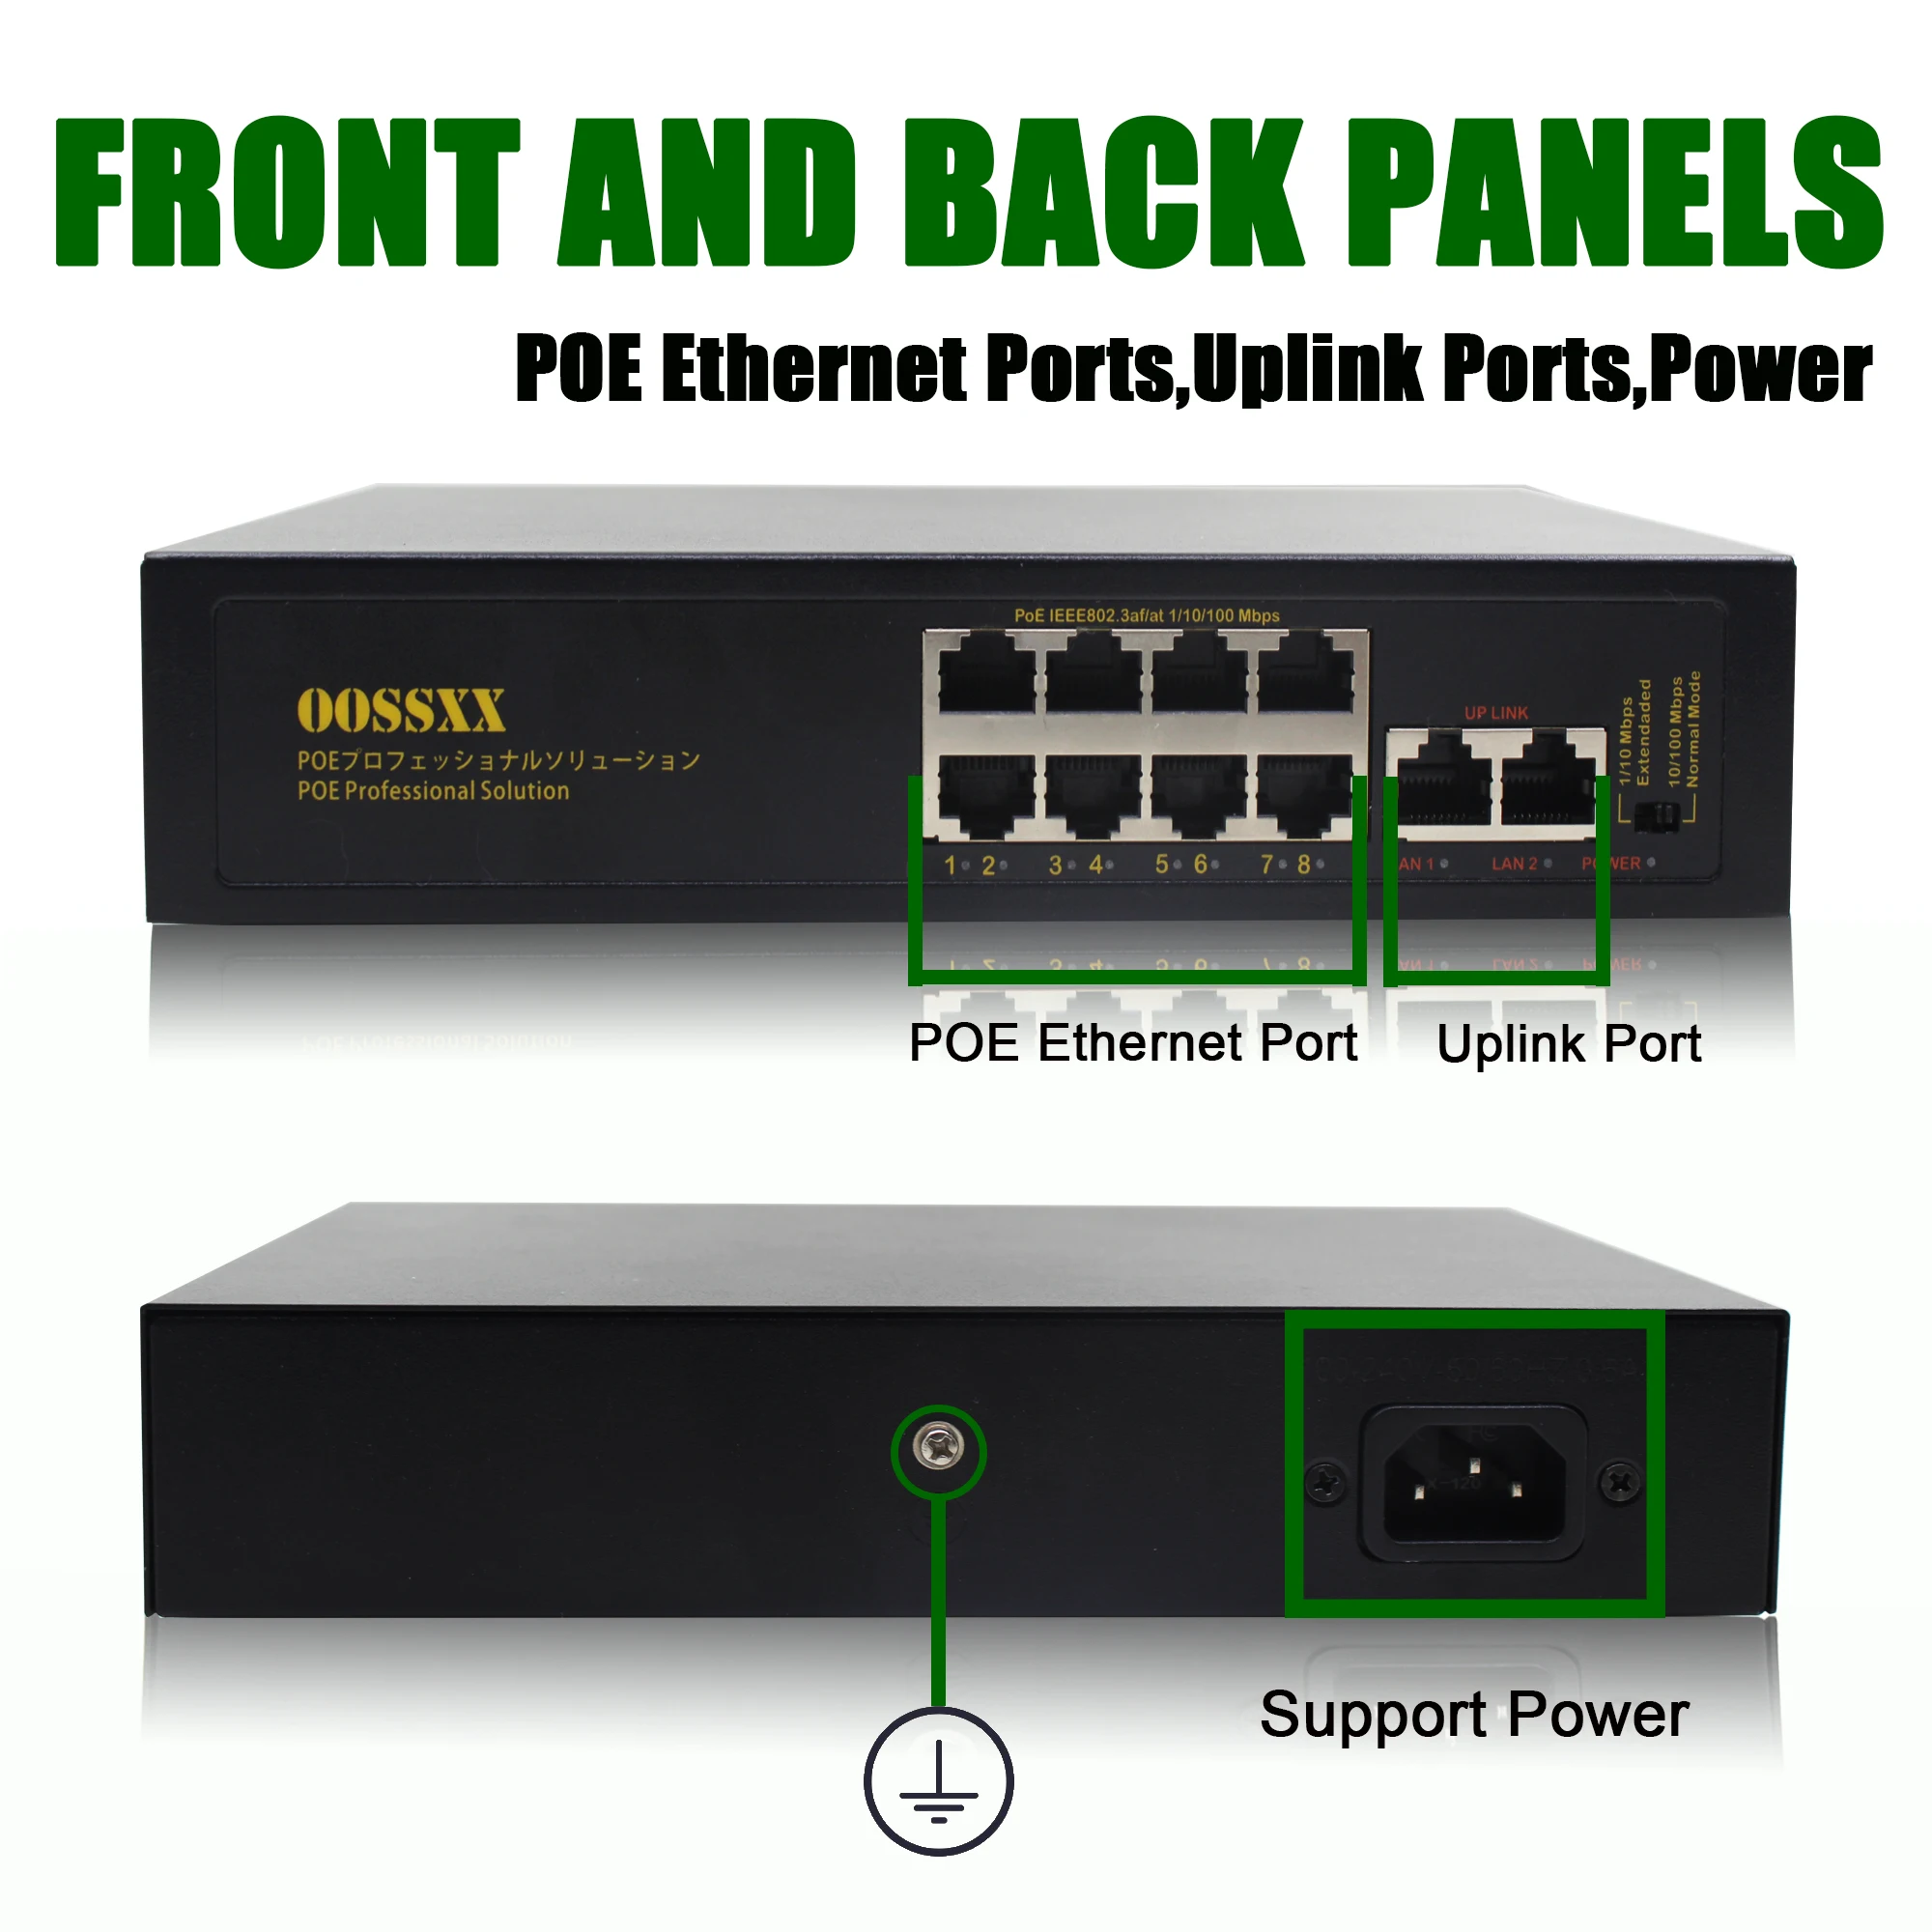 

Poe Network Switch Ethernet with RJ45 Network Ports IEEE 802.3 af/at Suitable for CCTV Camera System